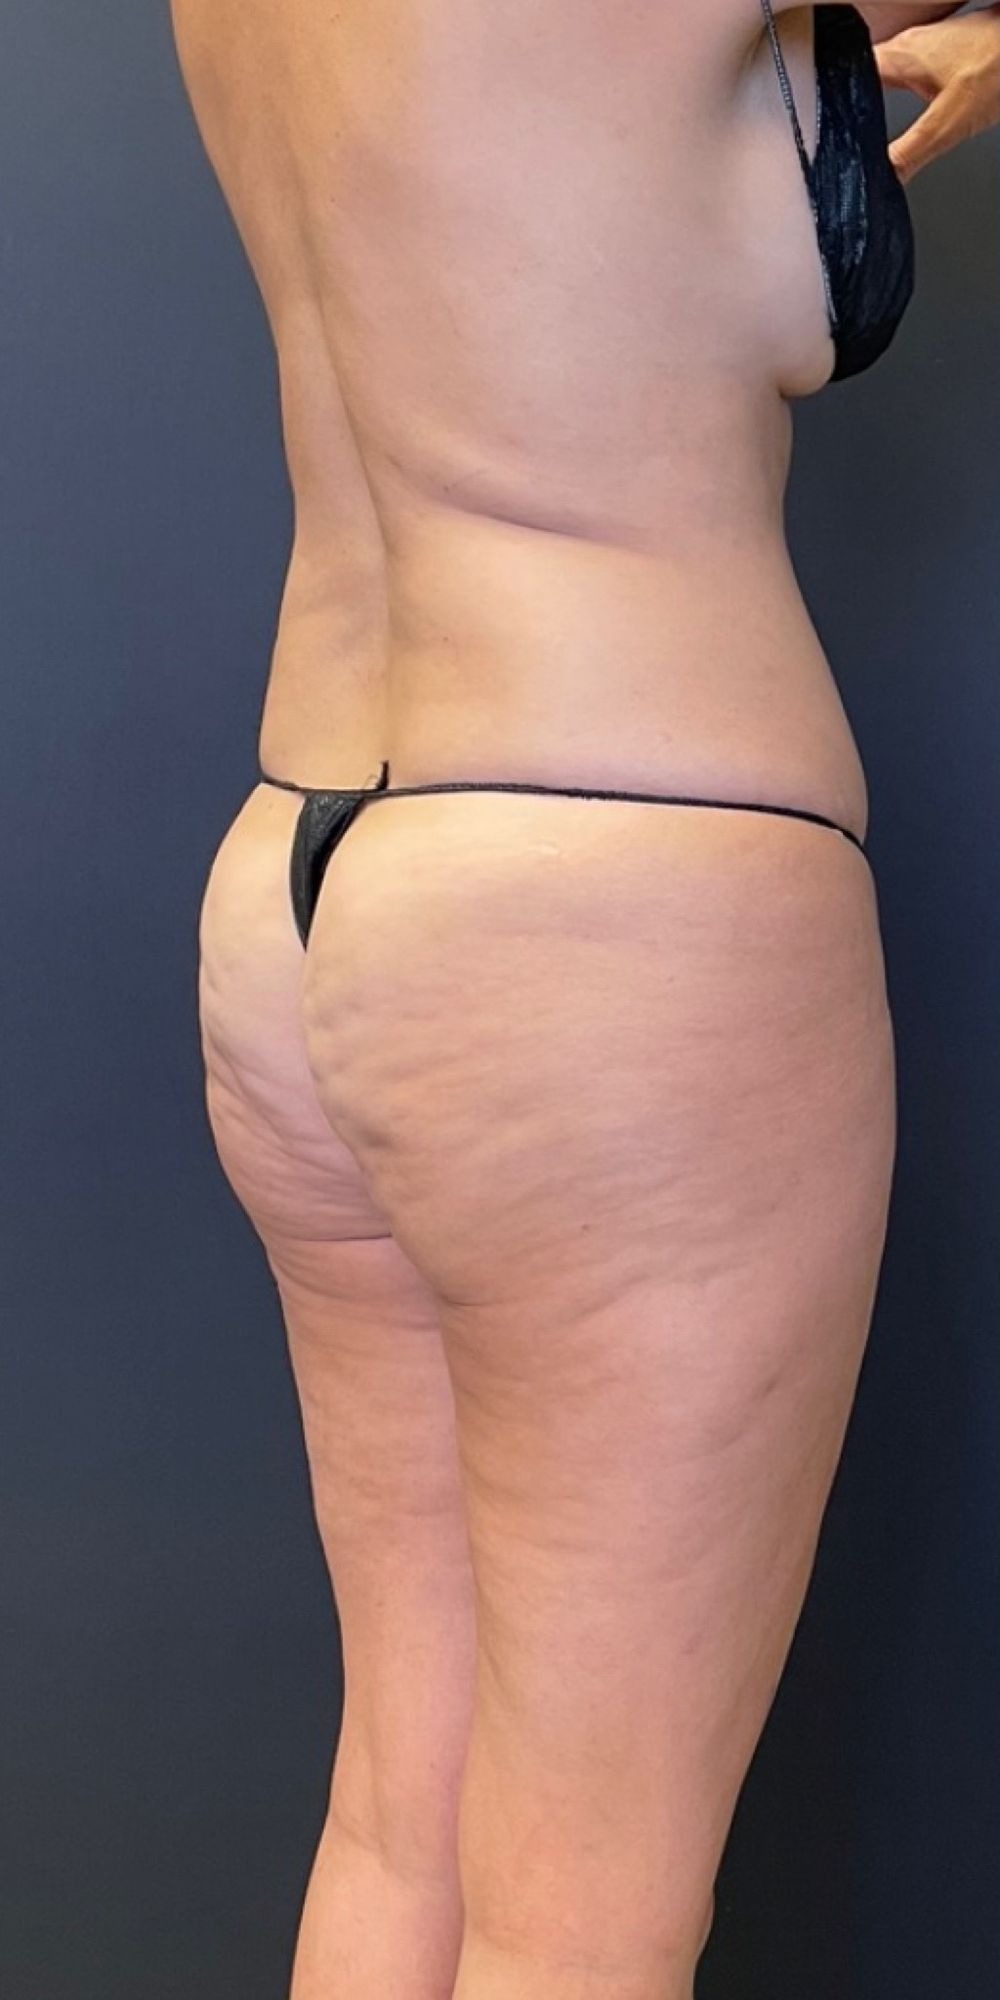 brazilian butt lift before and after pictures